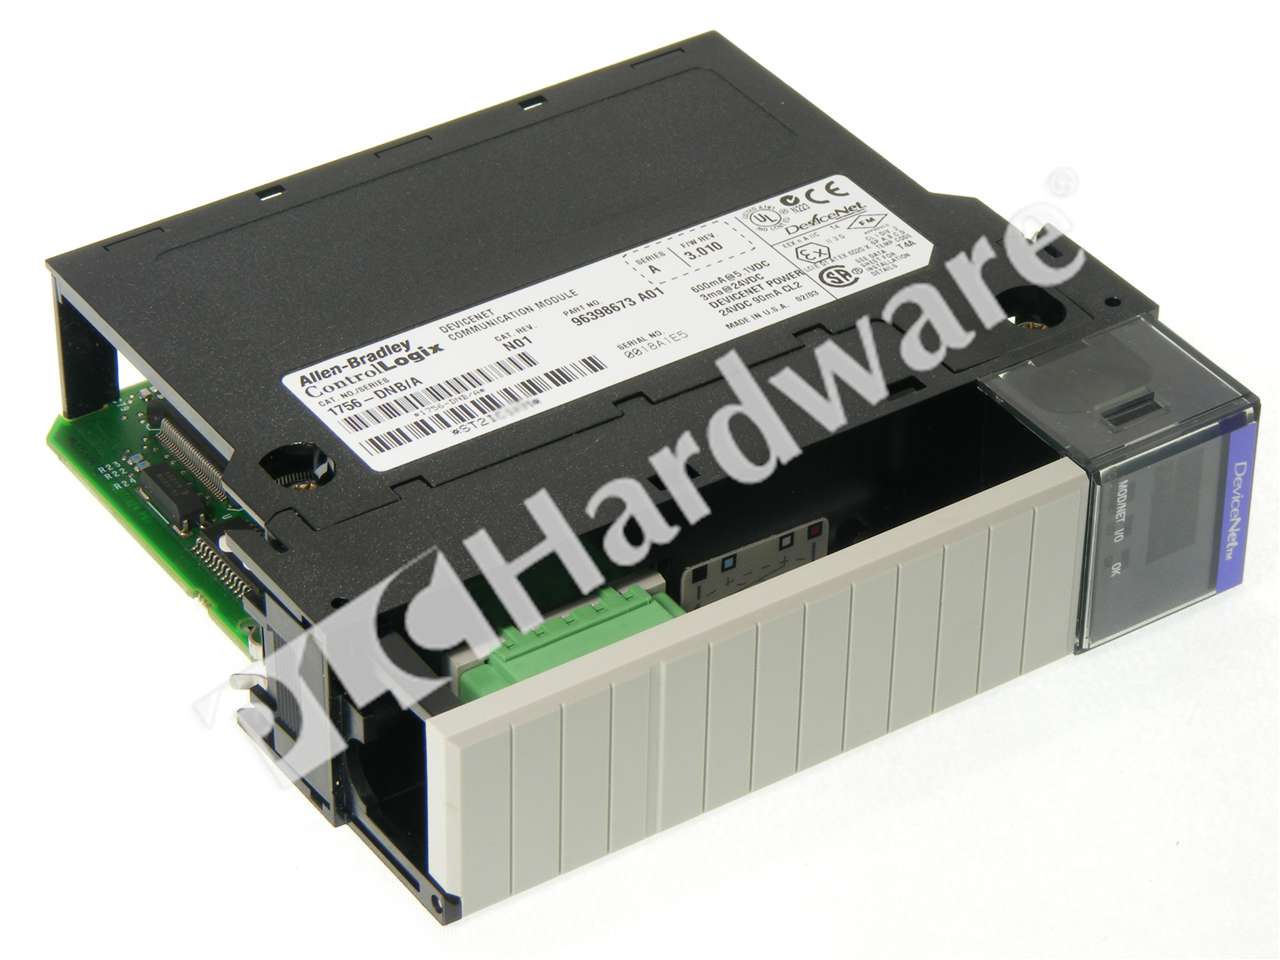 PLC Hardware - Allen Bradley 1756-DNB Series A, Used in a PLCH Packaging